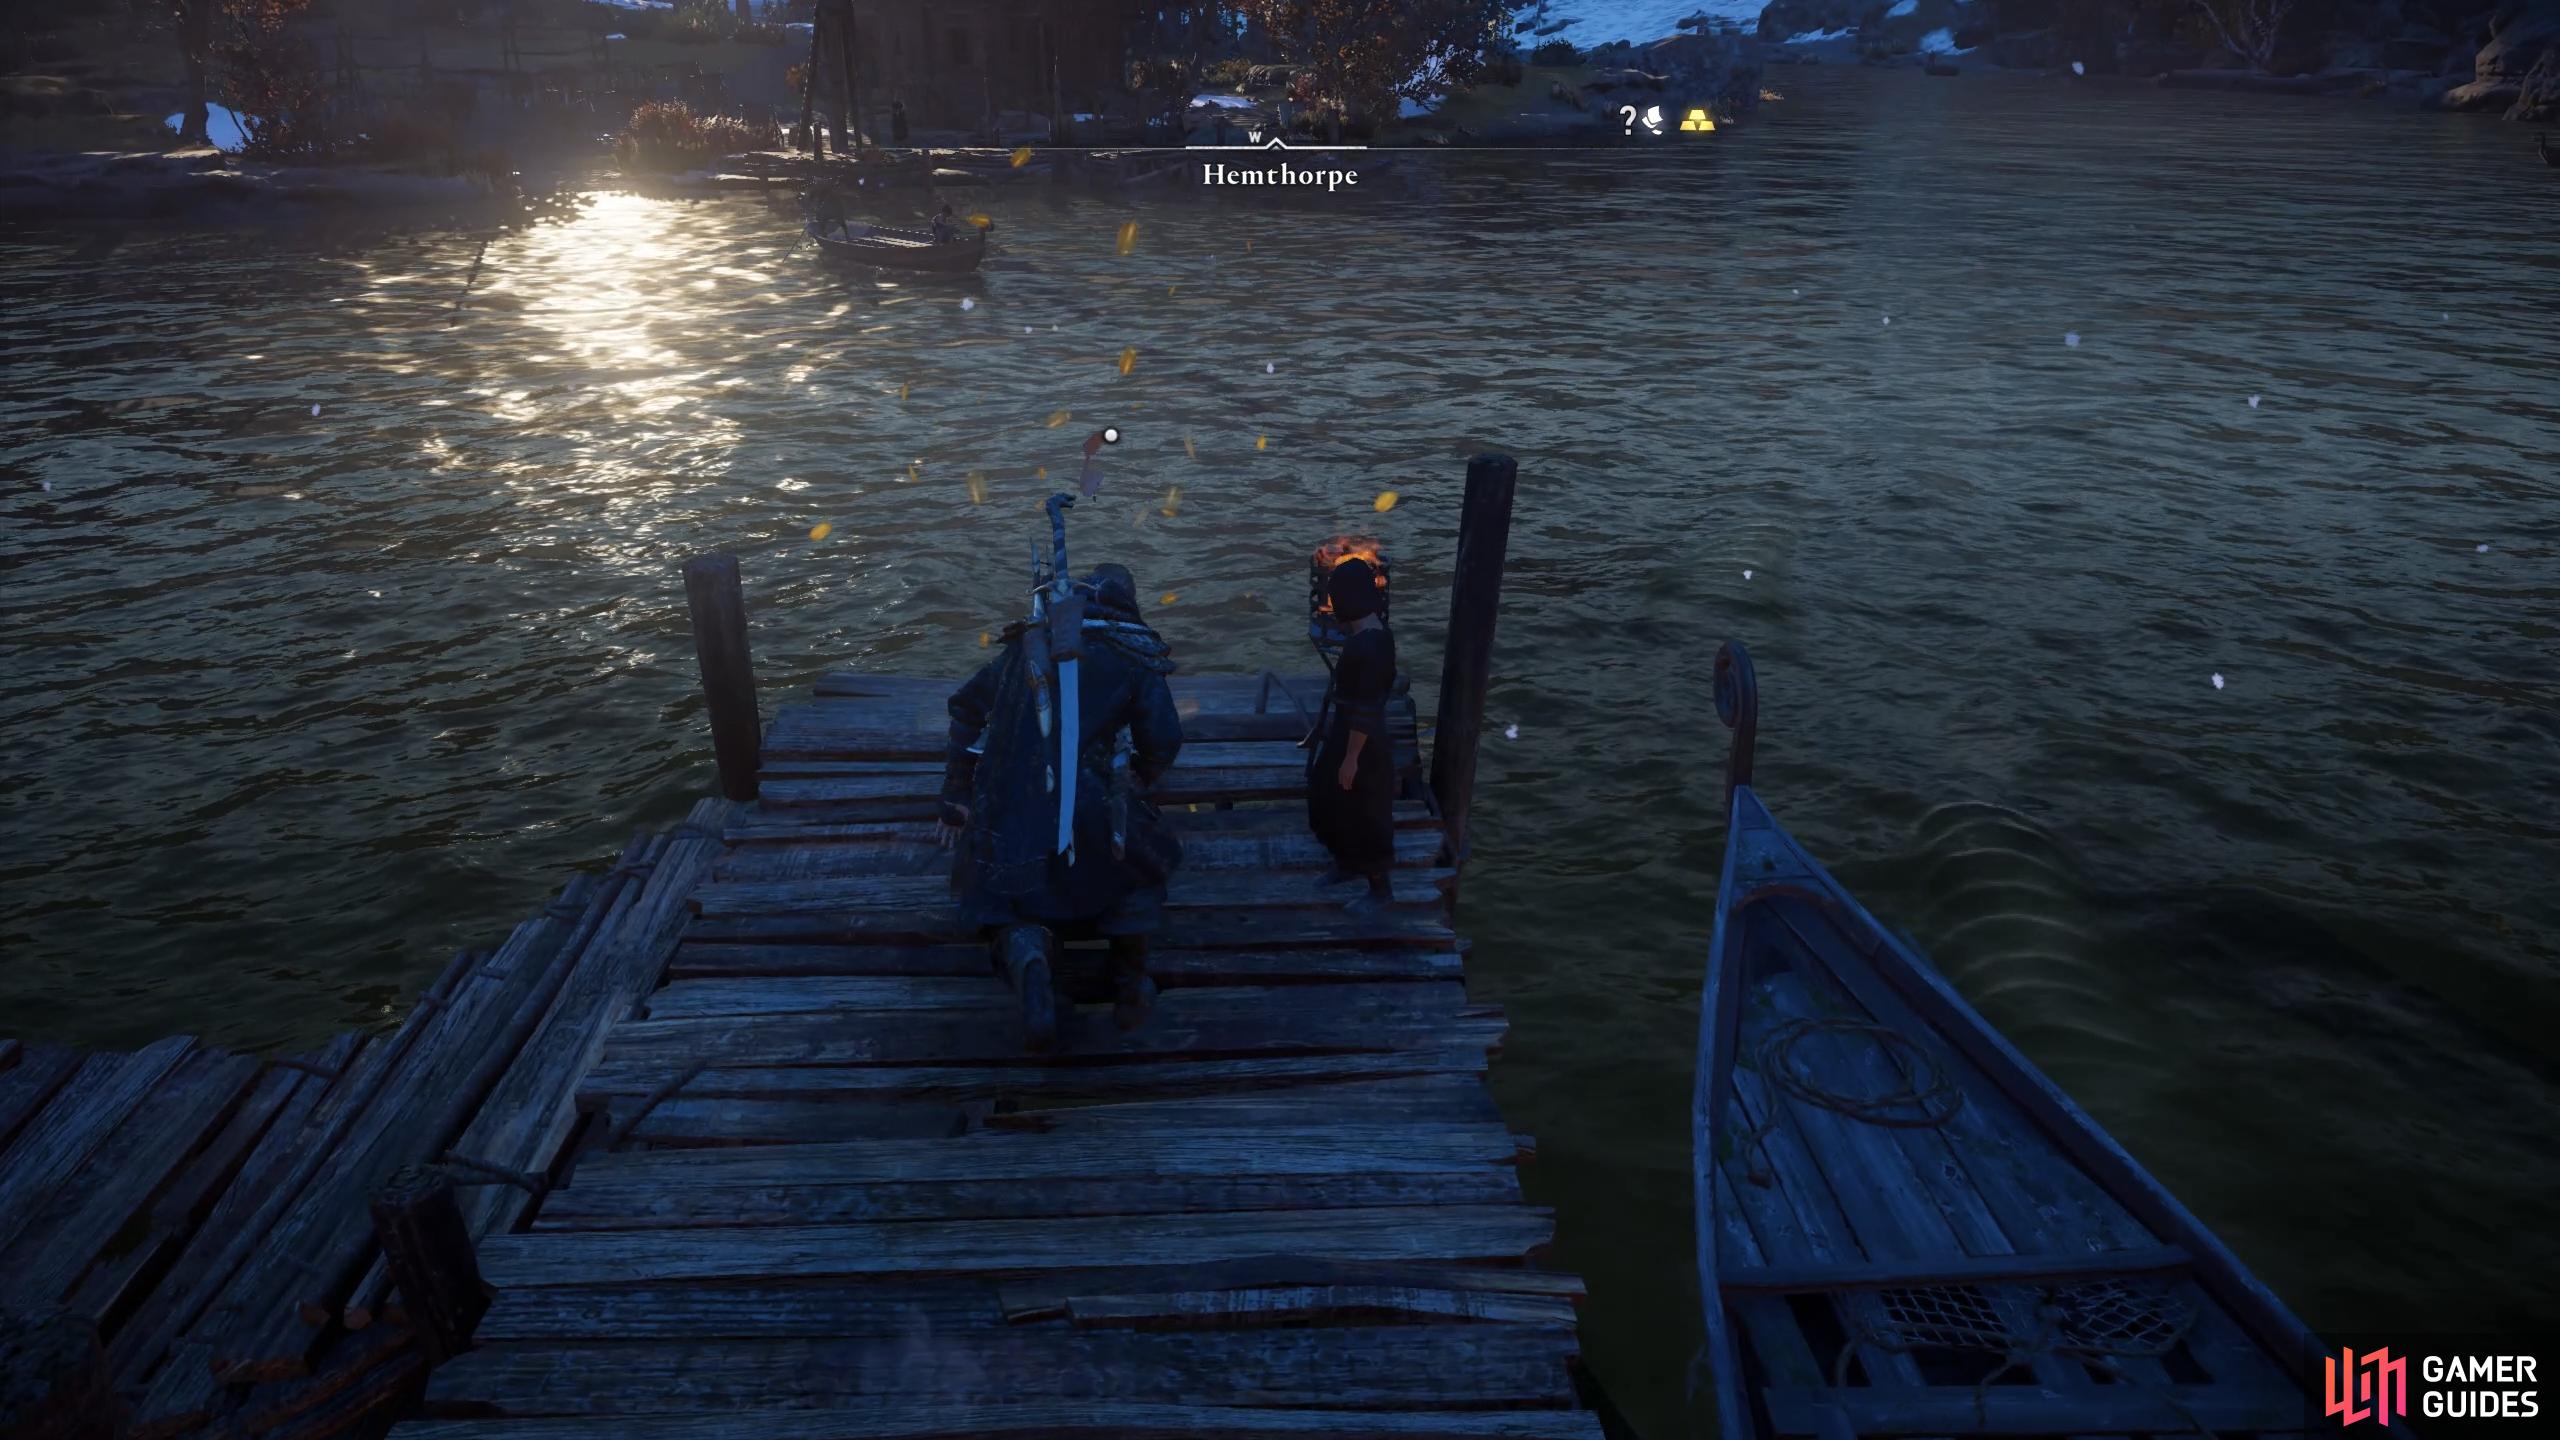 The flying paper will stop at the other side of the docks.